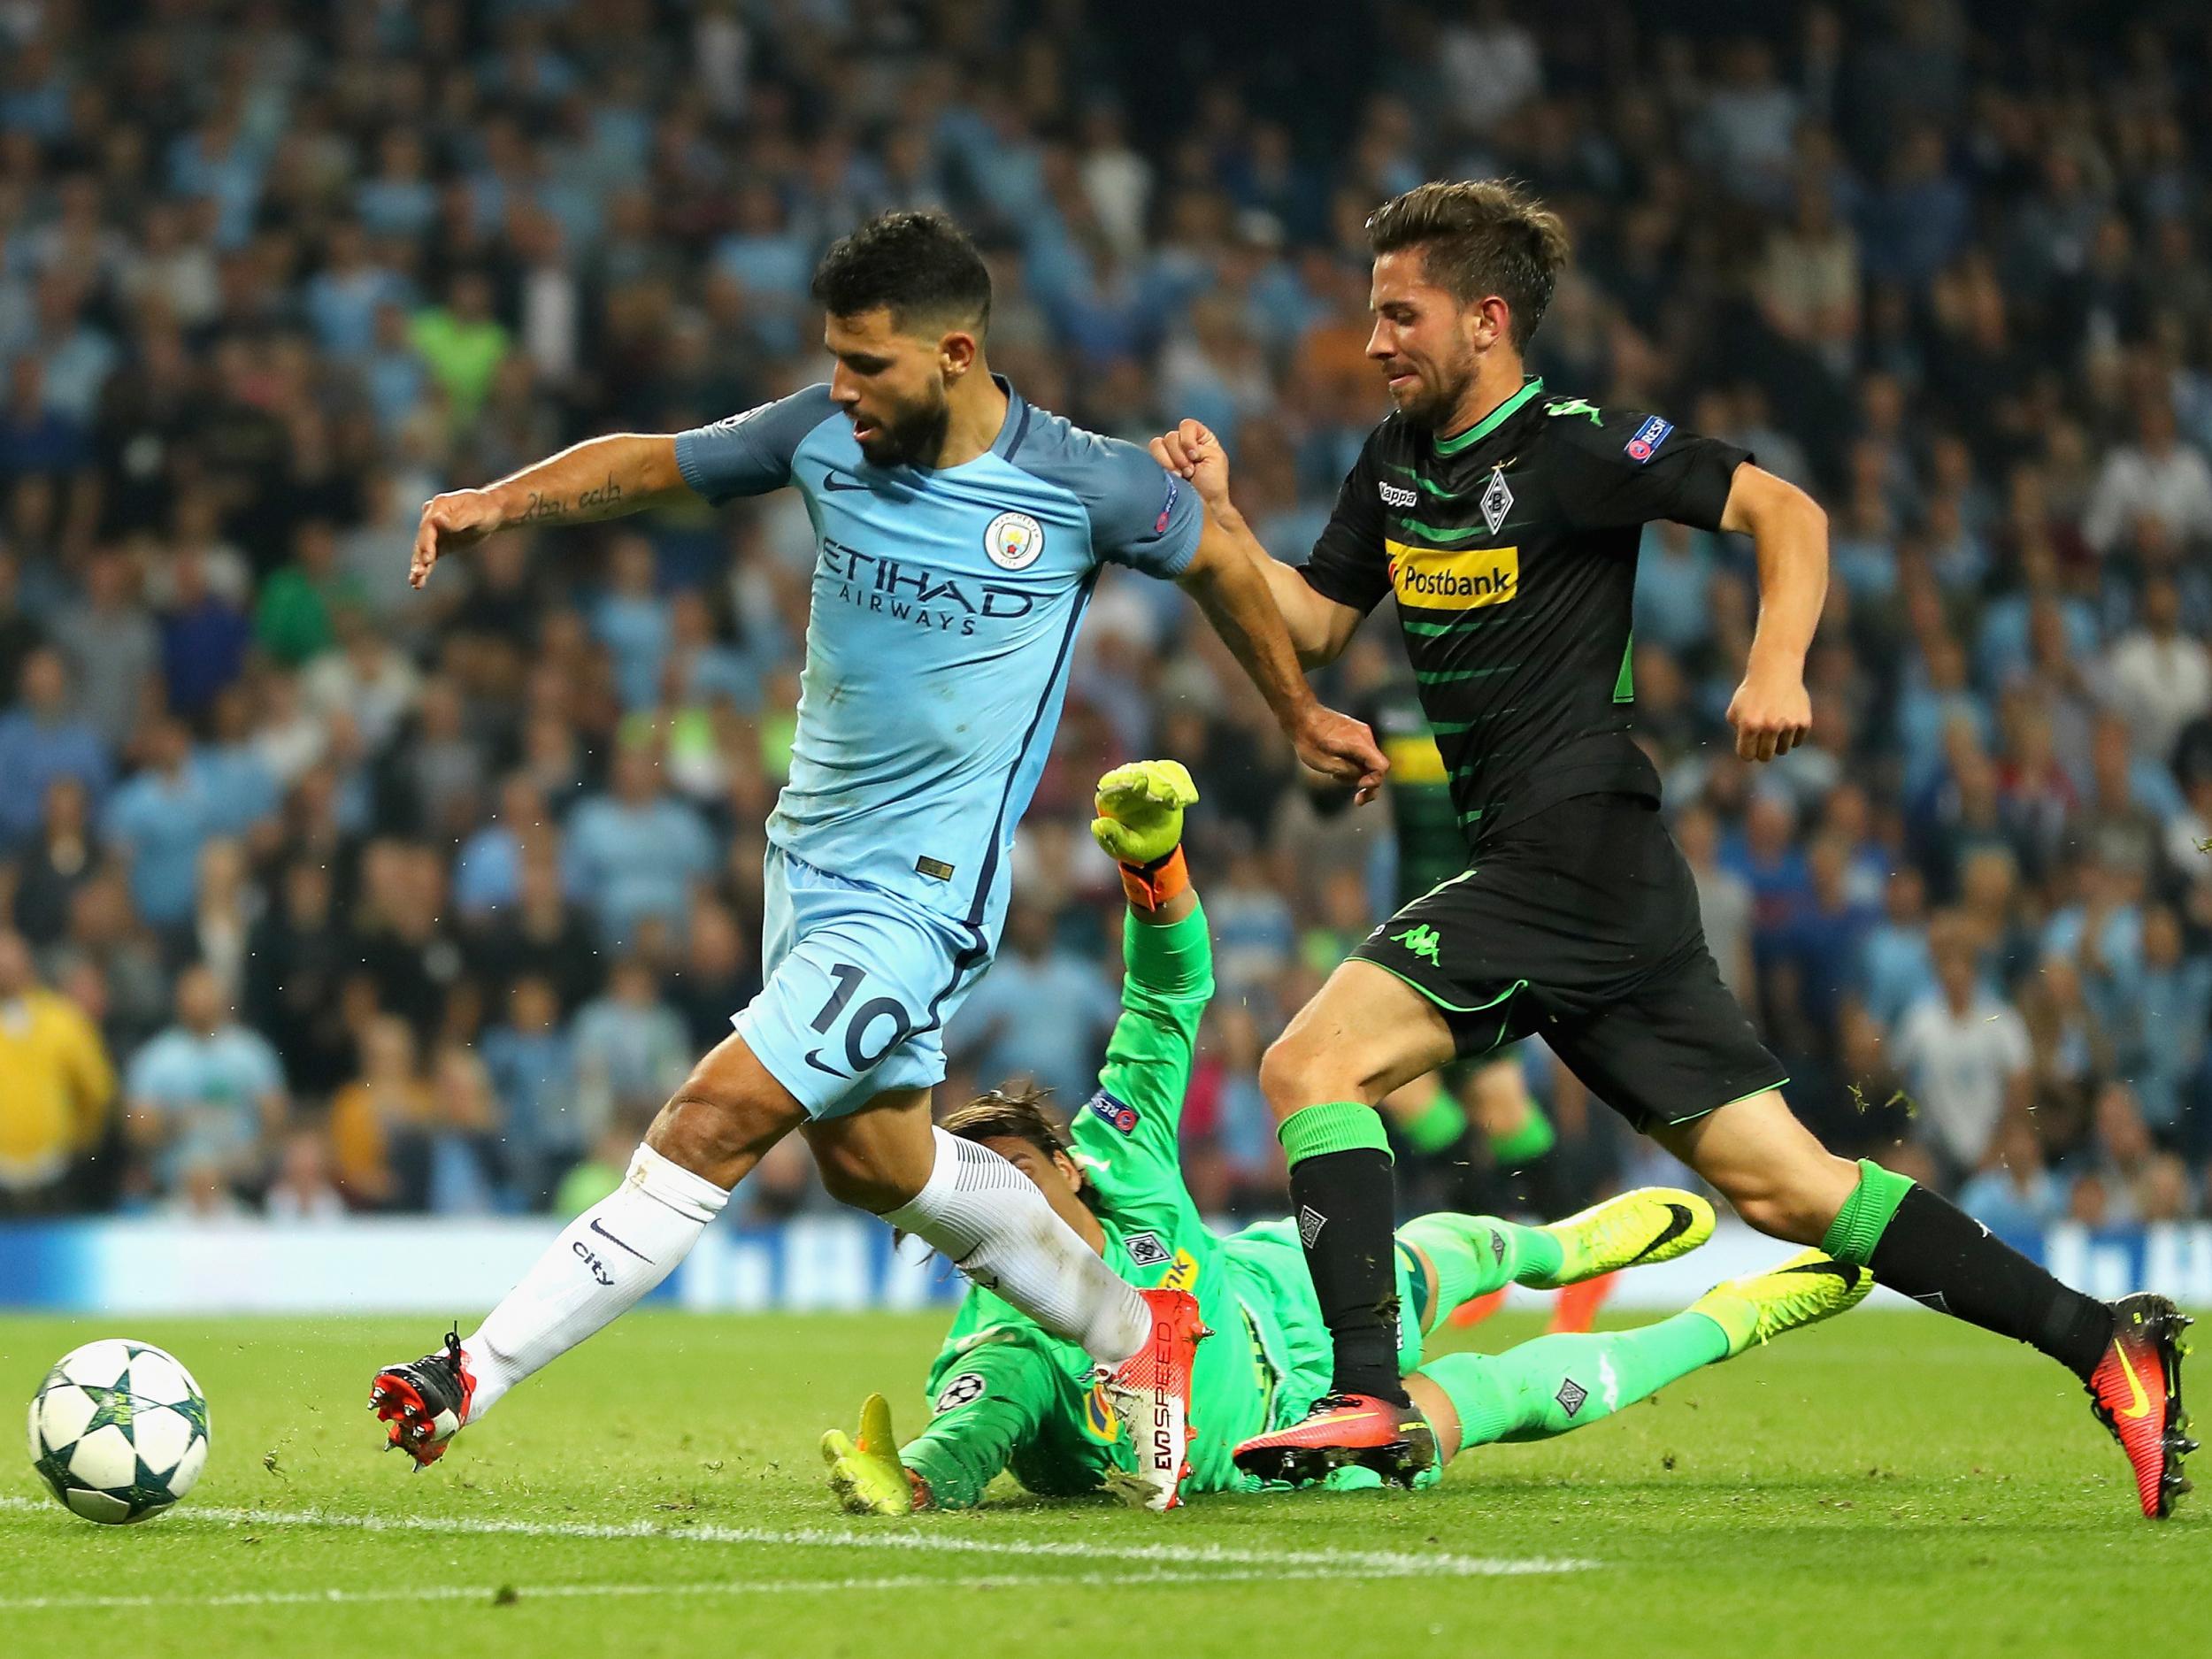 Sergio Aguero scored a hat-trick when they played at the Etihad